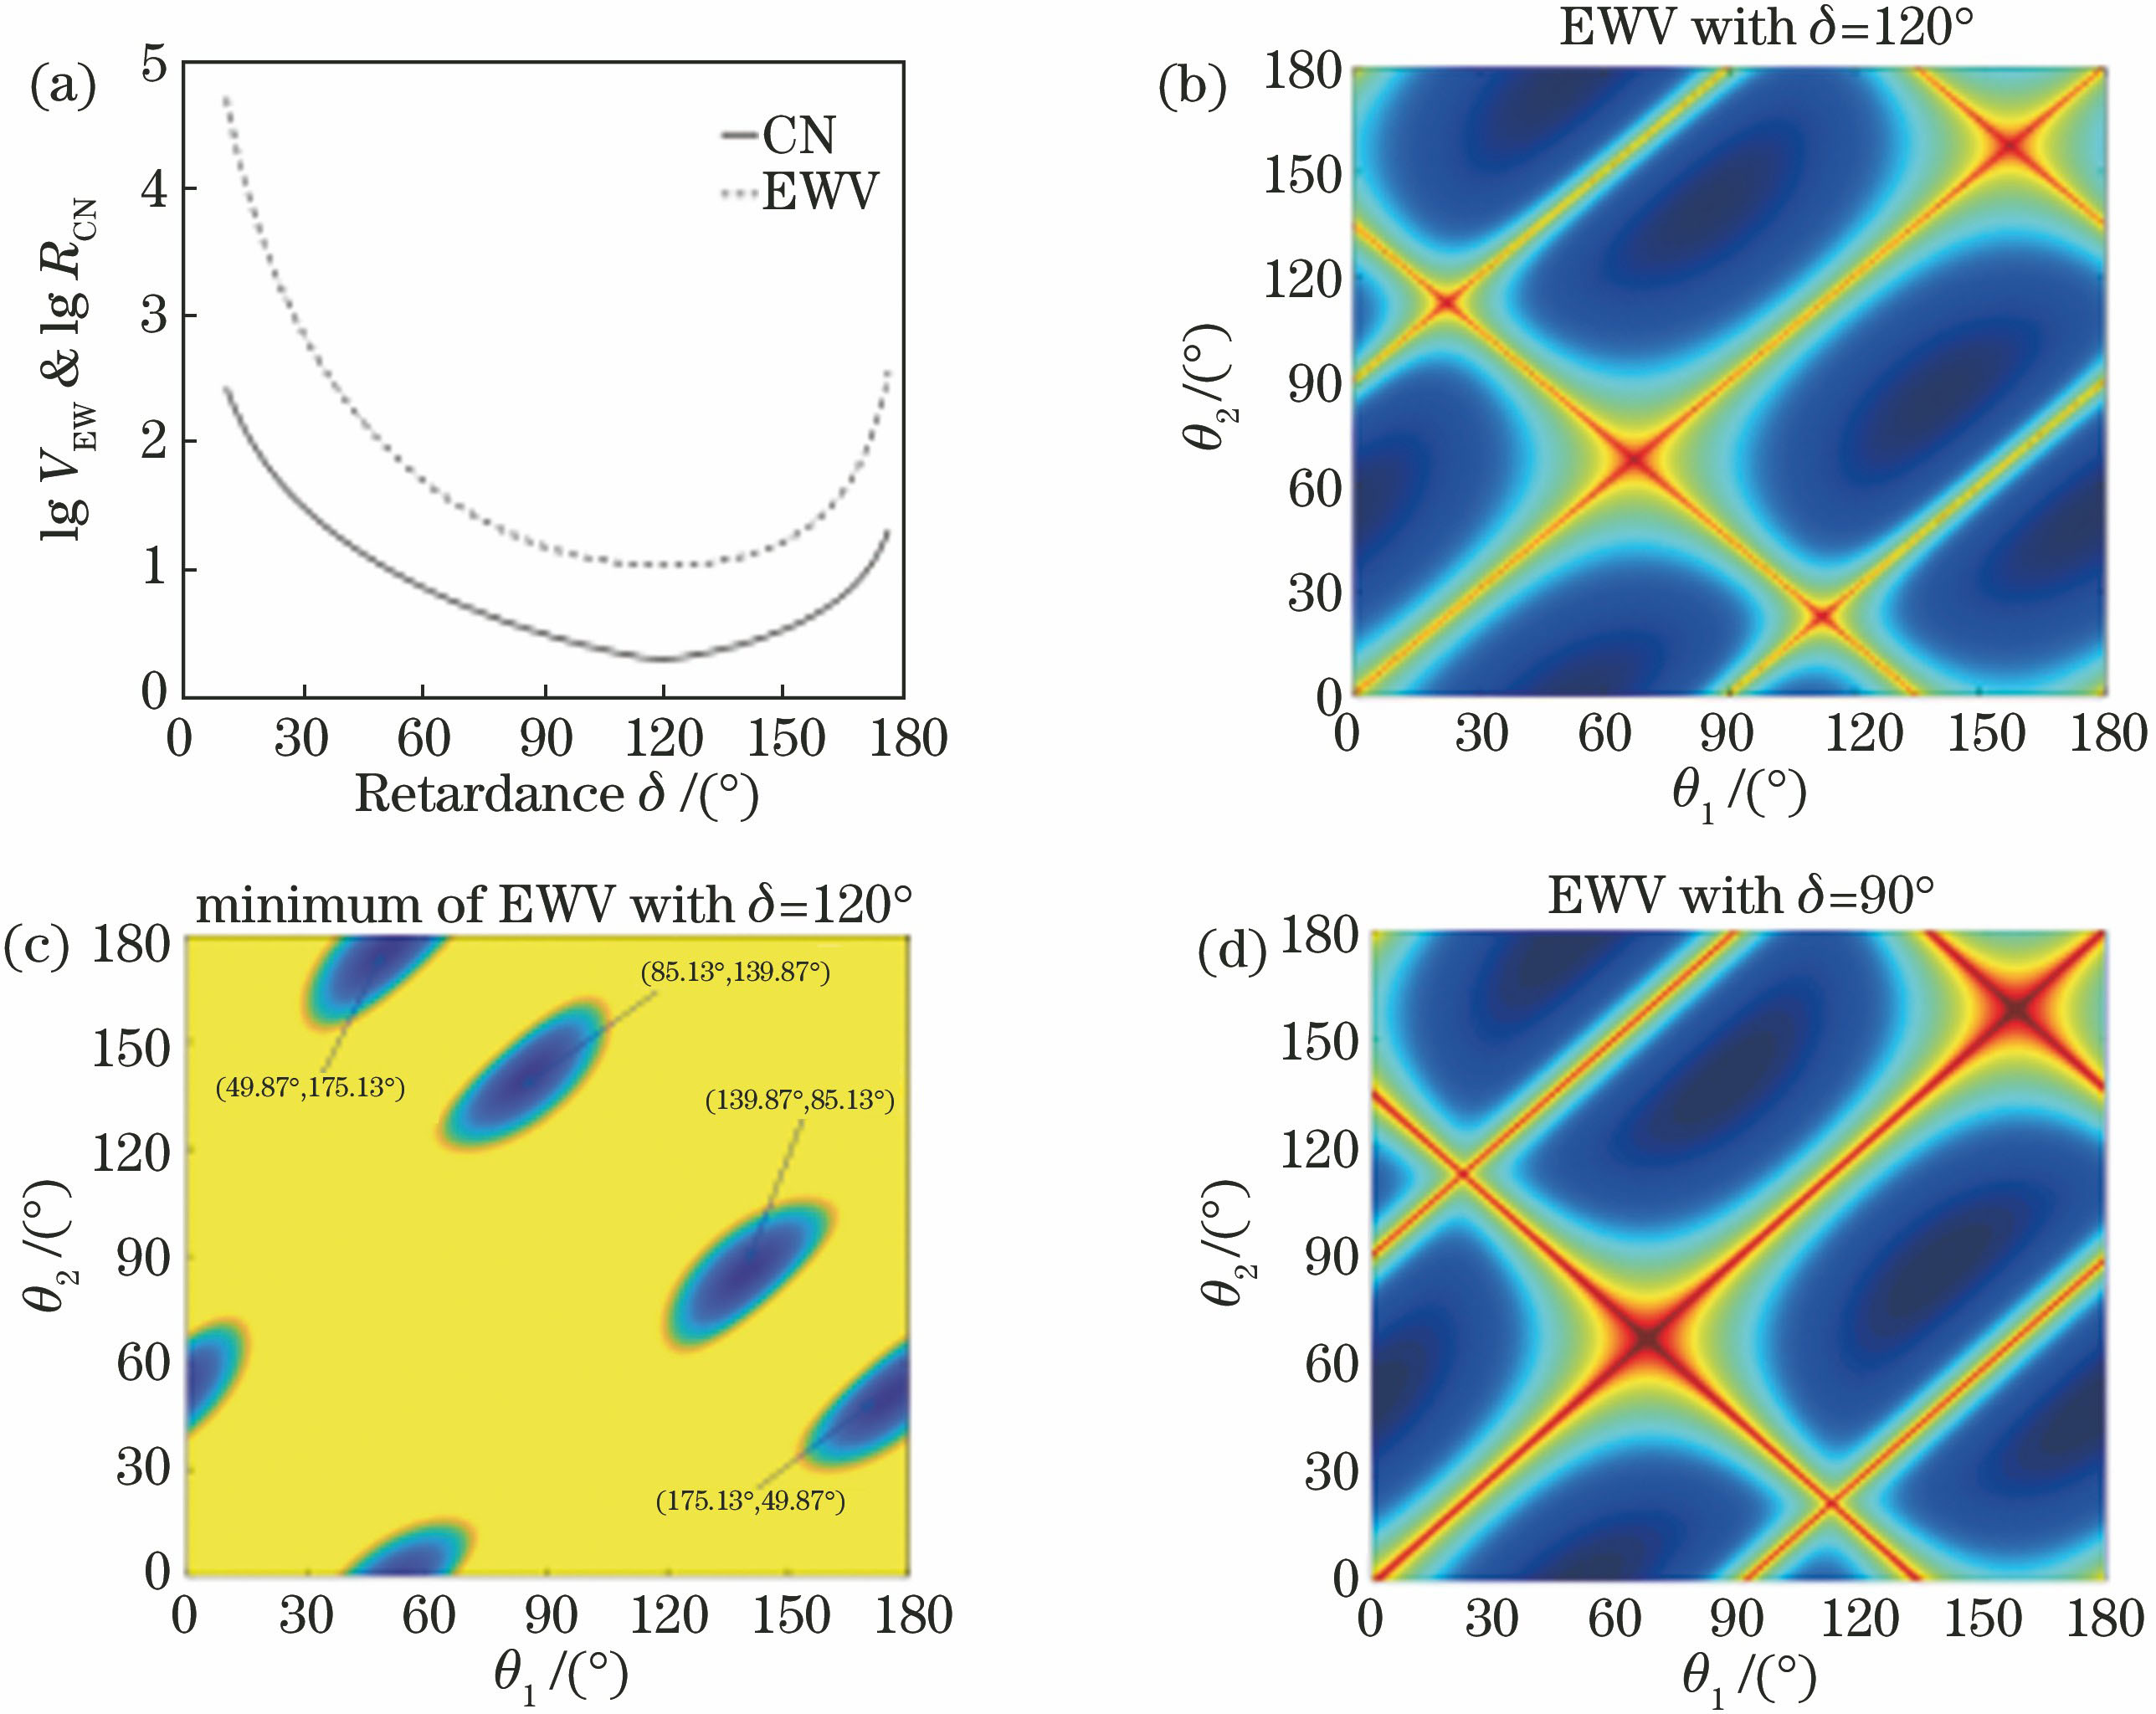 Optimization of EWV. (a) EWV value (logarithm) and condition number (CN) as functions of phase retardance δ of waveplate; (b) EWV value as a function of two rotation angles (θ1,θ2) of rotatable phase retarder with phase retardance δ=120°; (c) optimal solutions corresponding to minimum of EWV with phase retardance δ=120°; (d) EWV value as a function of two rotation angles (θ1,θ2) of rotatable phase retard